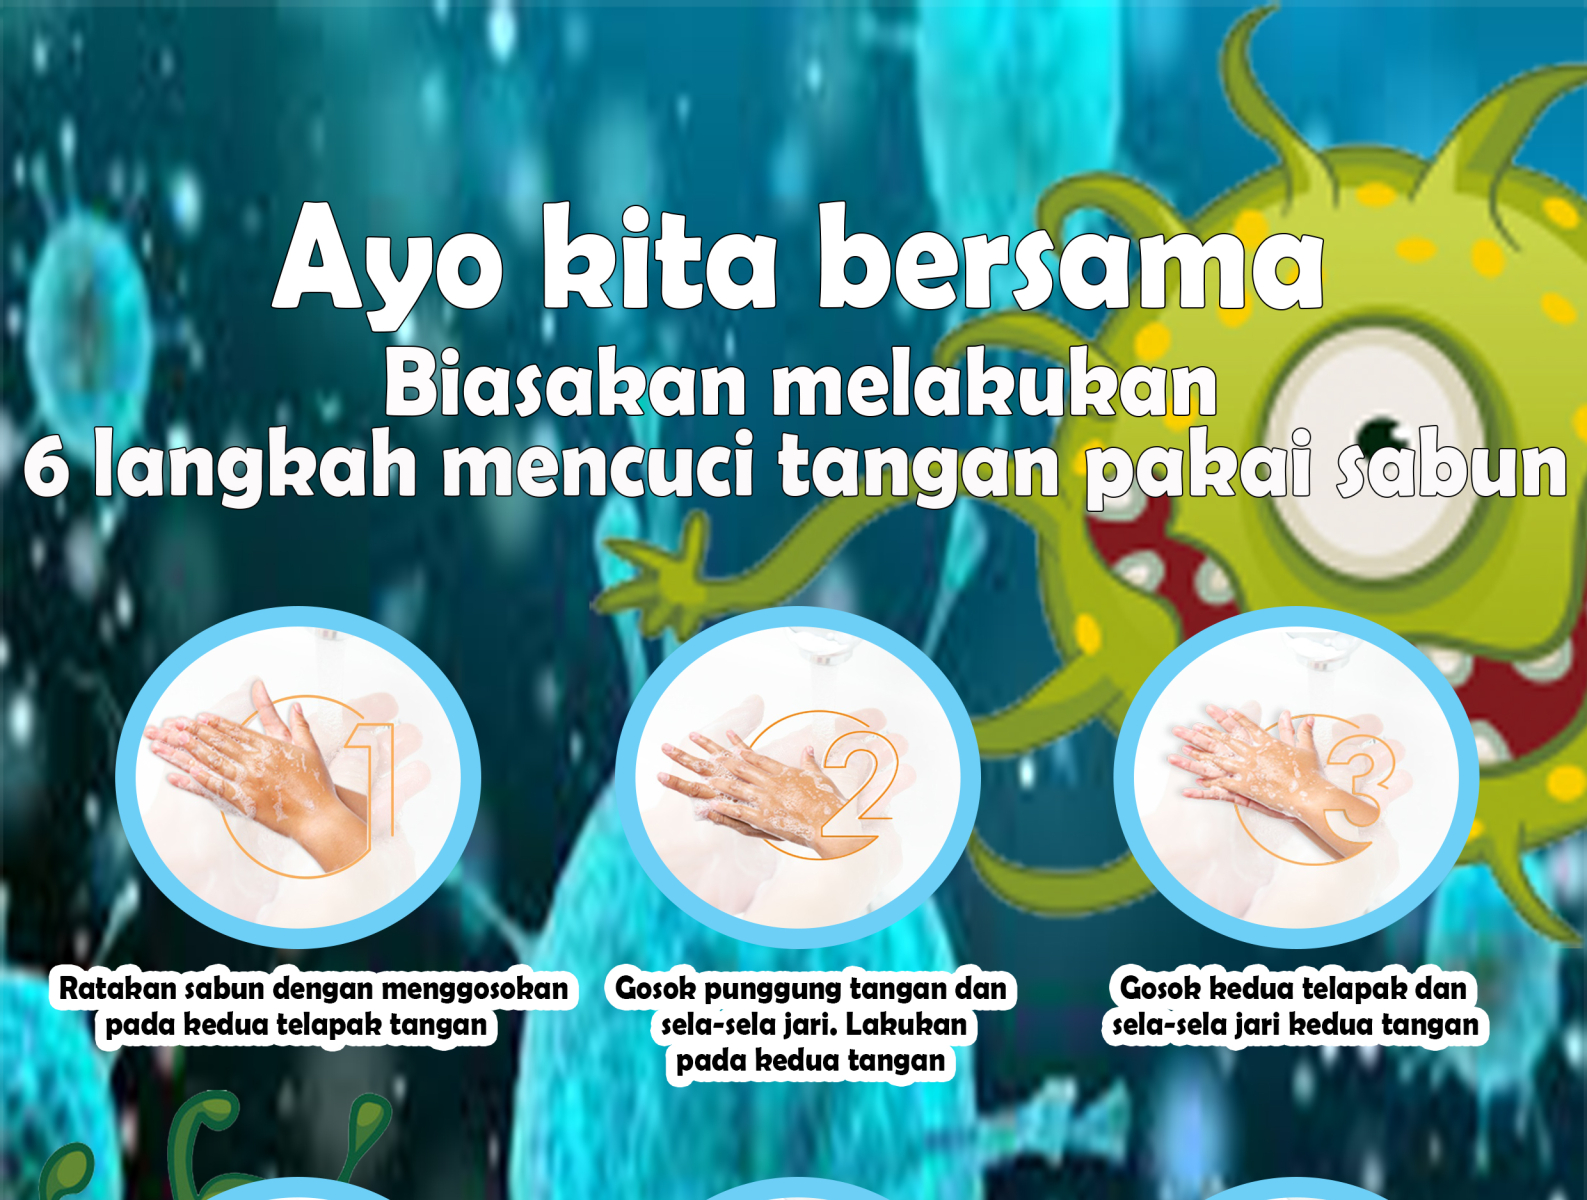 poster on how to wash hands properly and correctly by Muhamad Luffi Dwi ...